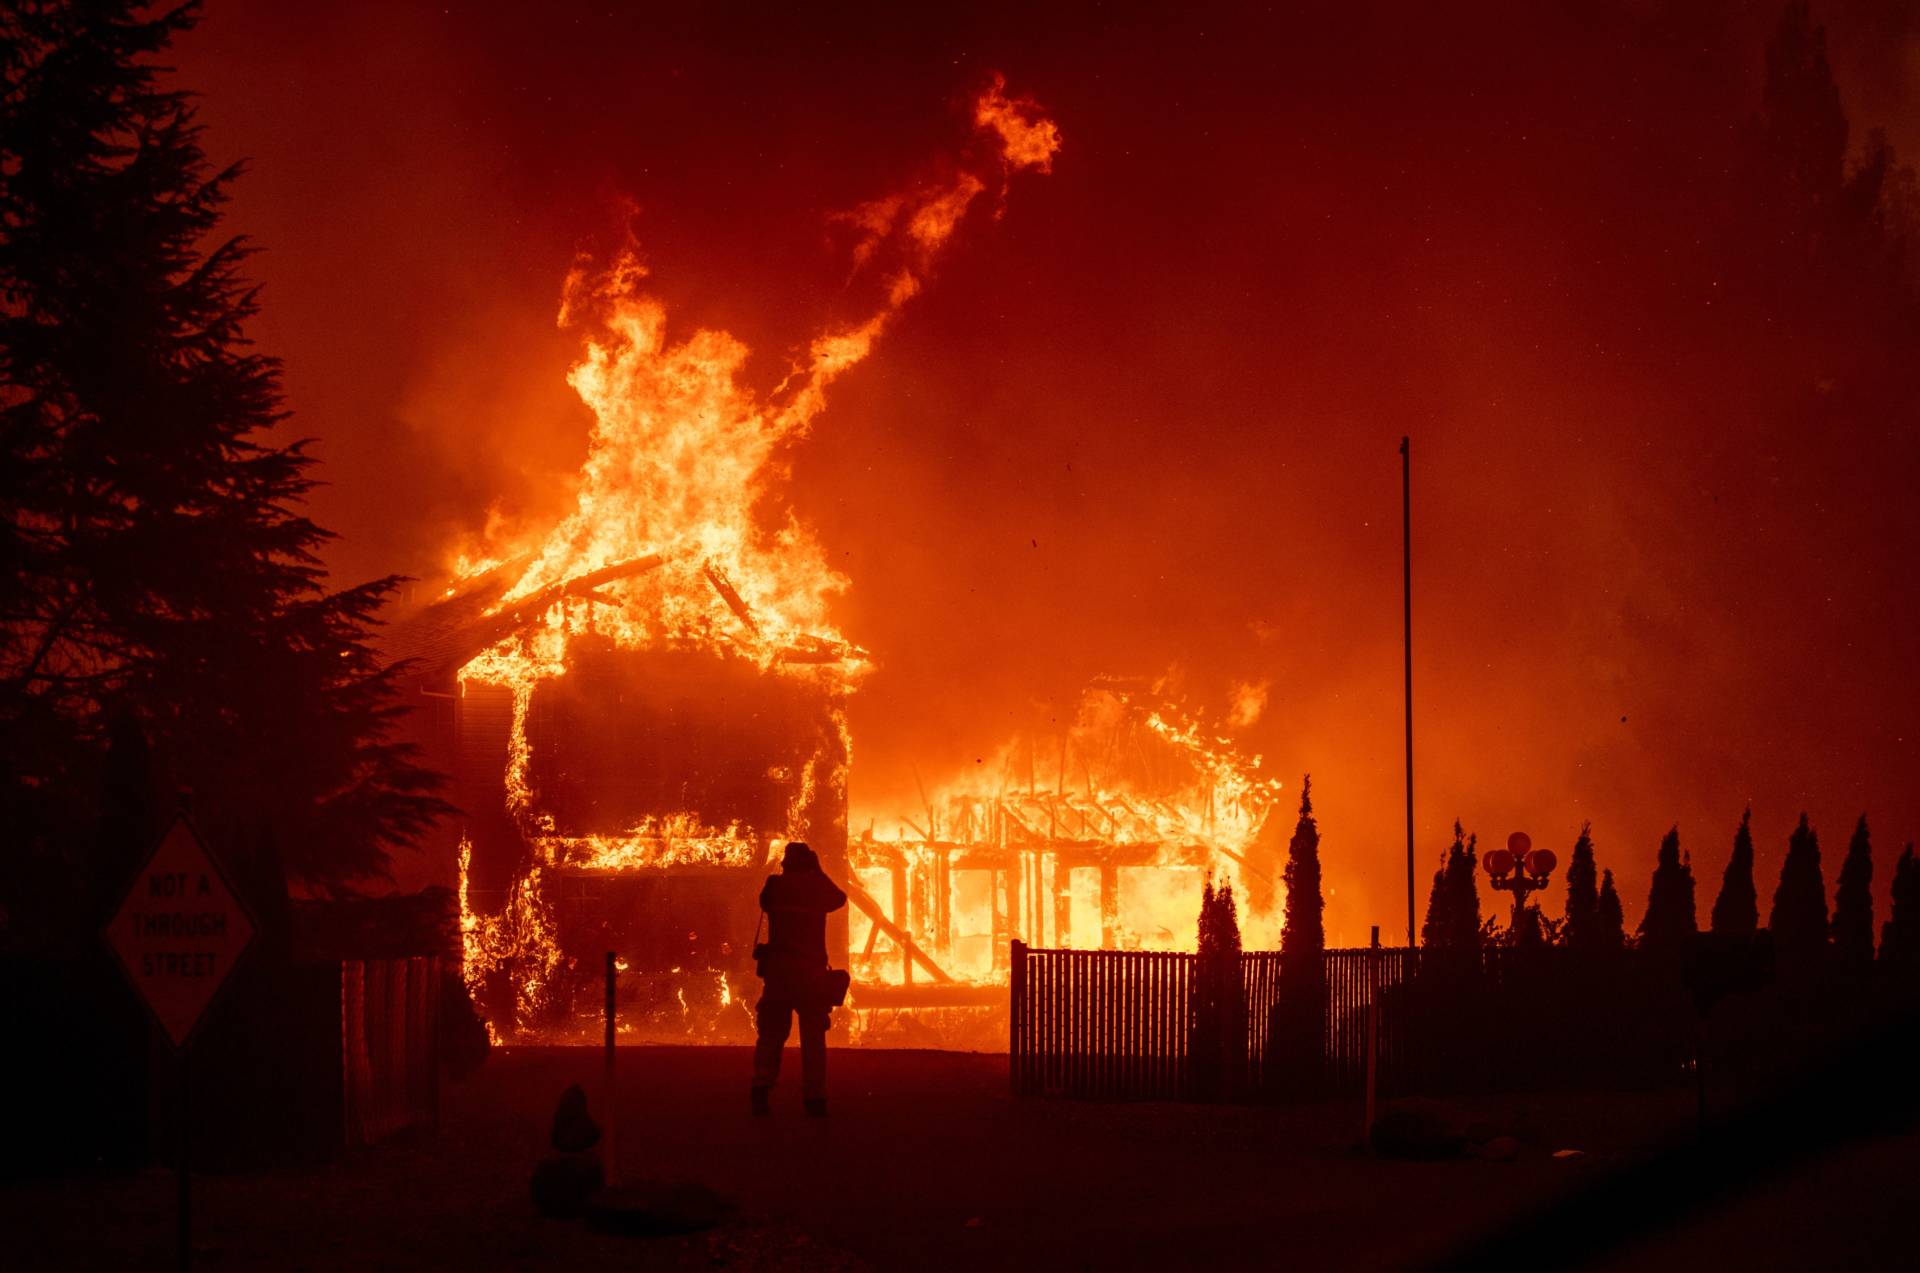 A home burns during the Camp Fire in Paradise, California on Nov. 8, 2018. Josh Edelson/AFP/Getty Images